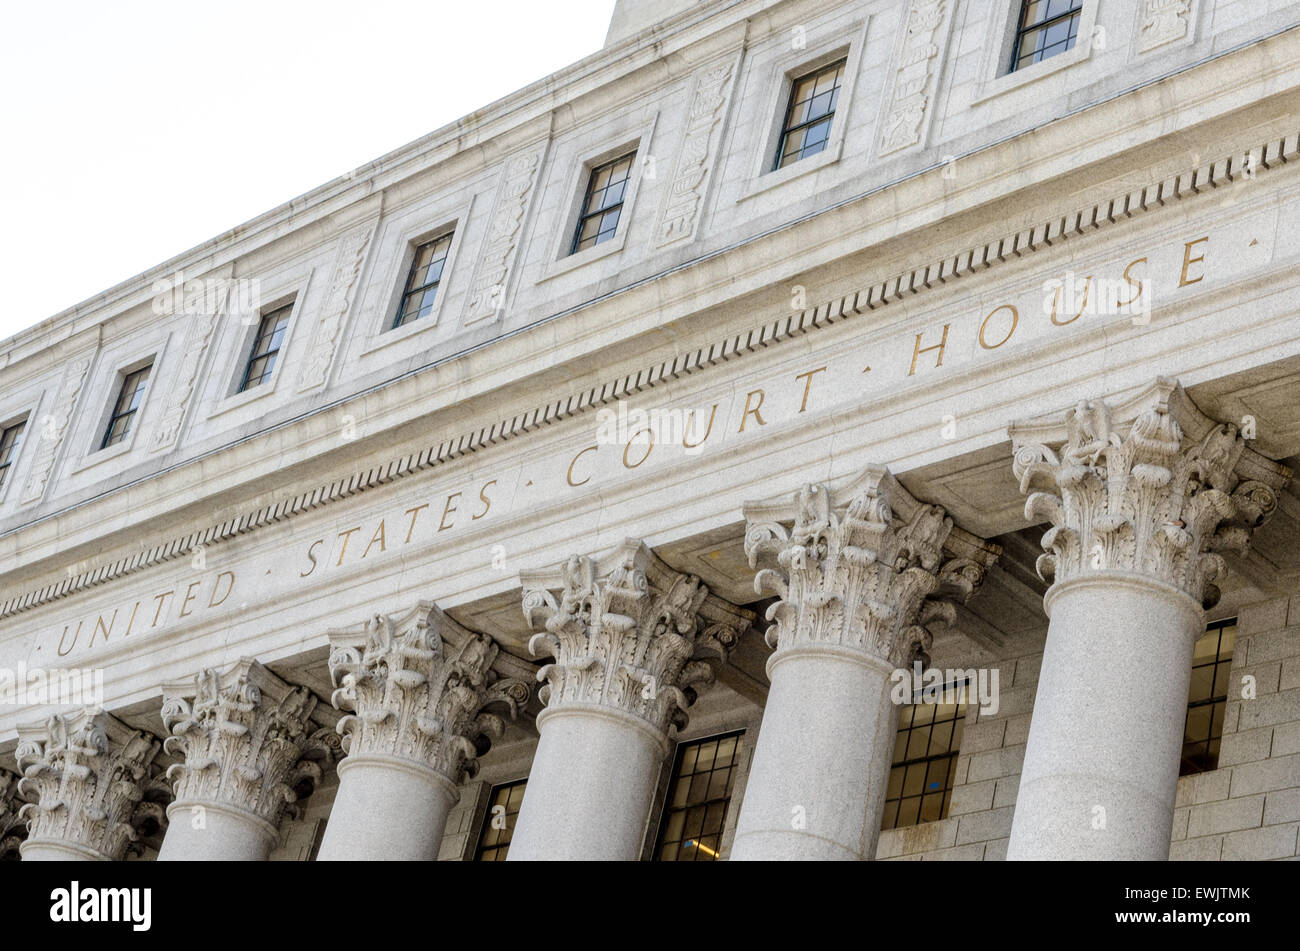 United States Court House dans Lower Manhattan, New York City Banque D'Images